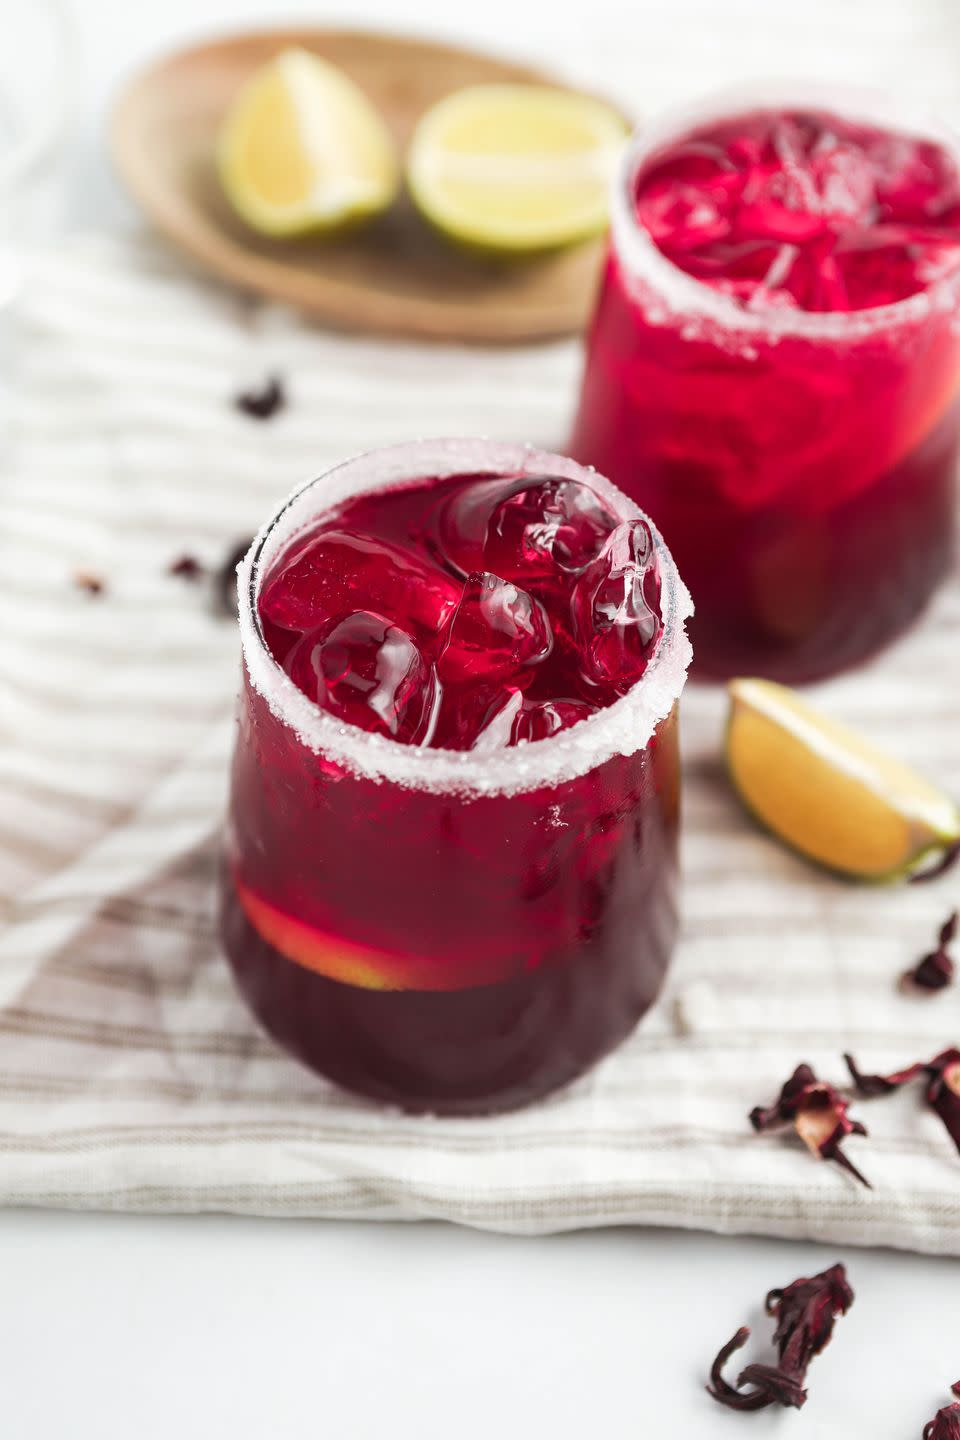 <p>Sure. <a href="https://www.delish.com/uk/cocktails-drinks/a30893337/best-classic-margarita-recipe/" rel="nofollow noopener" target="_blank" data-ylk="slk:Margaritas" class="link rapid-noclick-resp">Margaritas</a> are the bomb. But have you tried a Hibiscus Margarita yet? The hibiscus flower syrup adds a fruity and fresh flavour to this iconic Mexican cocktail. Plus, have you seen the colour of it? Gorgeous. </p><p>Get the <a href="https://www.delish.com/uk/cocktails-drinks/a38893106/hibiscus-margarita/" rel="nofollow noopener" target="_blank" data-ylk="slk:Hibiscus Margarita" class="link rapid-noclick-resp">Hibiscus Margarita</a> recipe. </p>